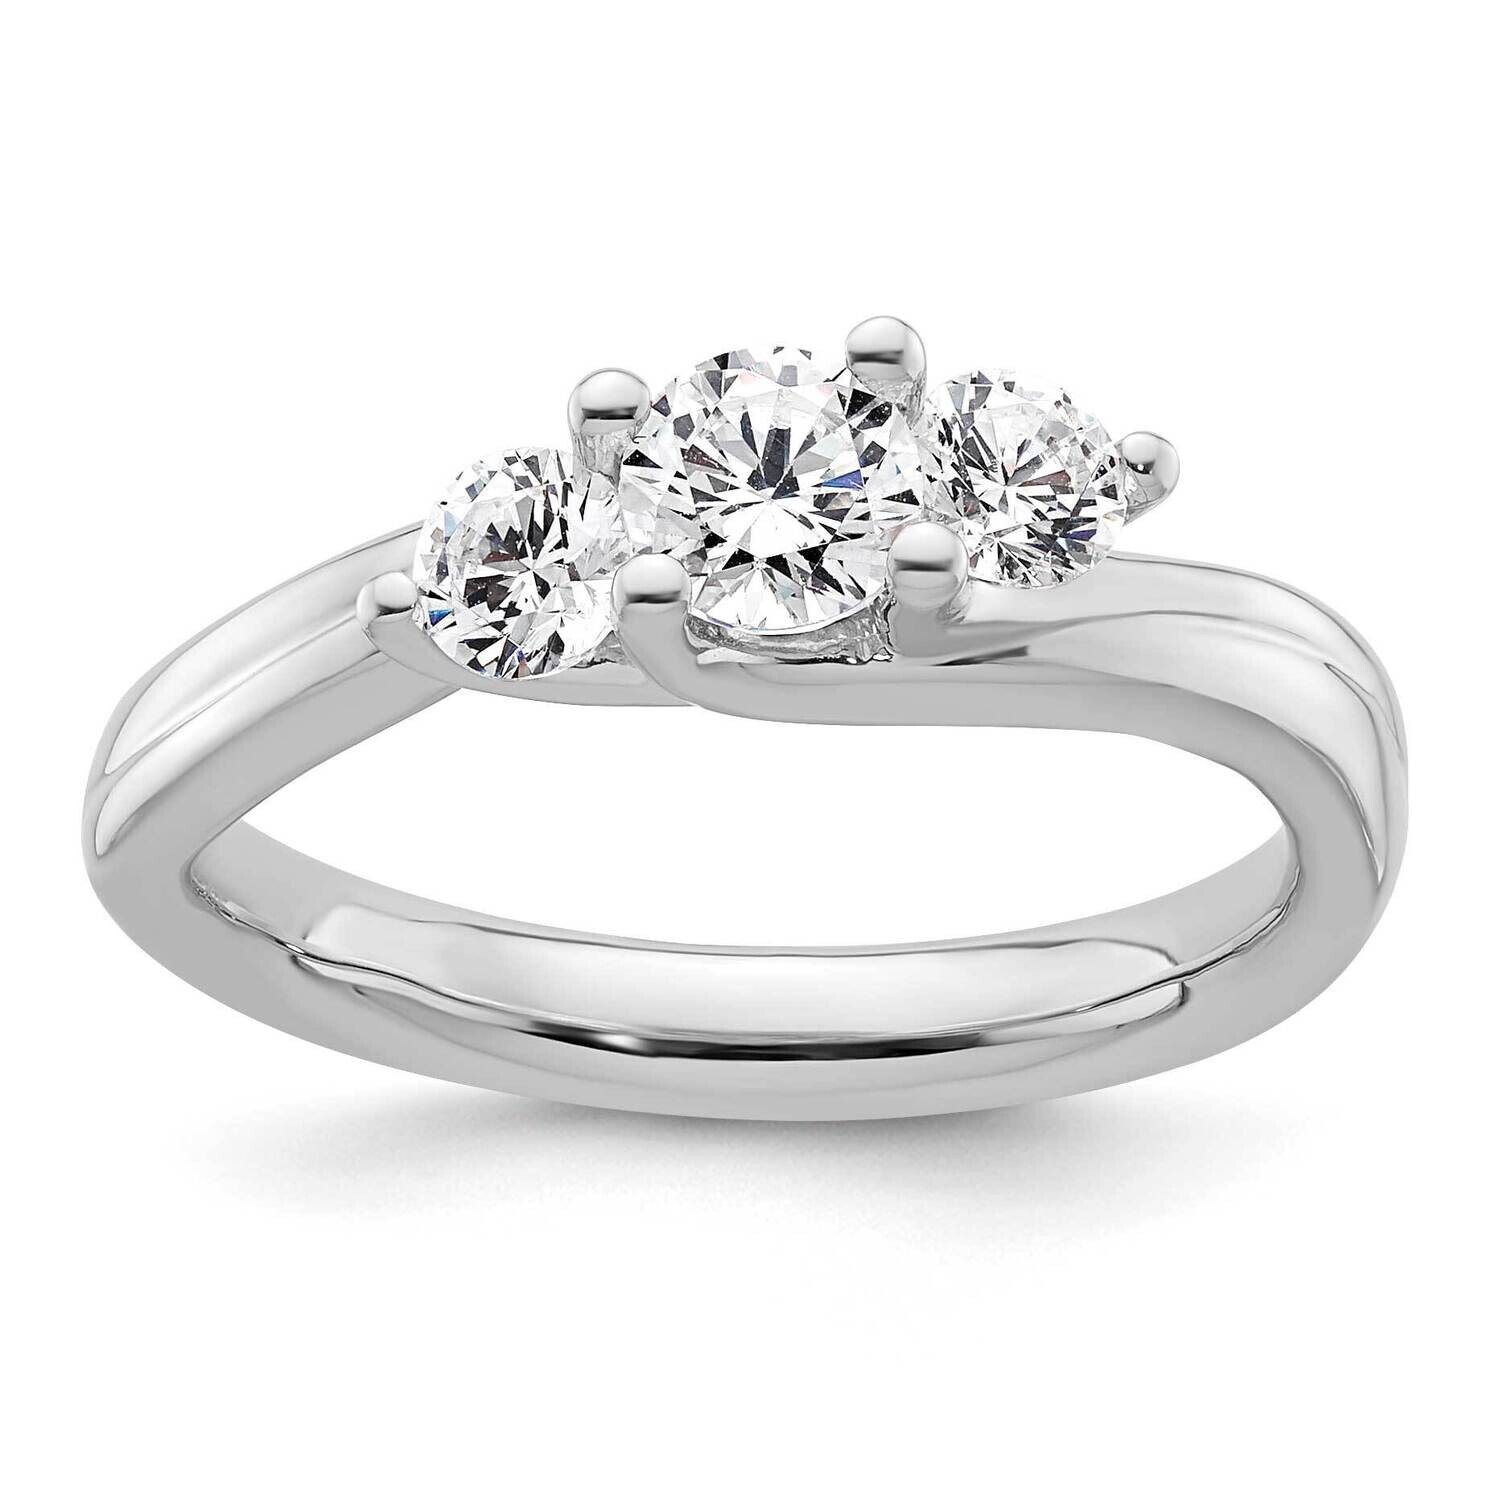 3-Stone Holds 3/8 Carat 4.6mm Round Center 2-3.7mm Round Sides Engagement Ring Mounting 14k White Gold RM2963E-038-WAA